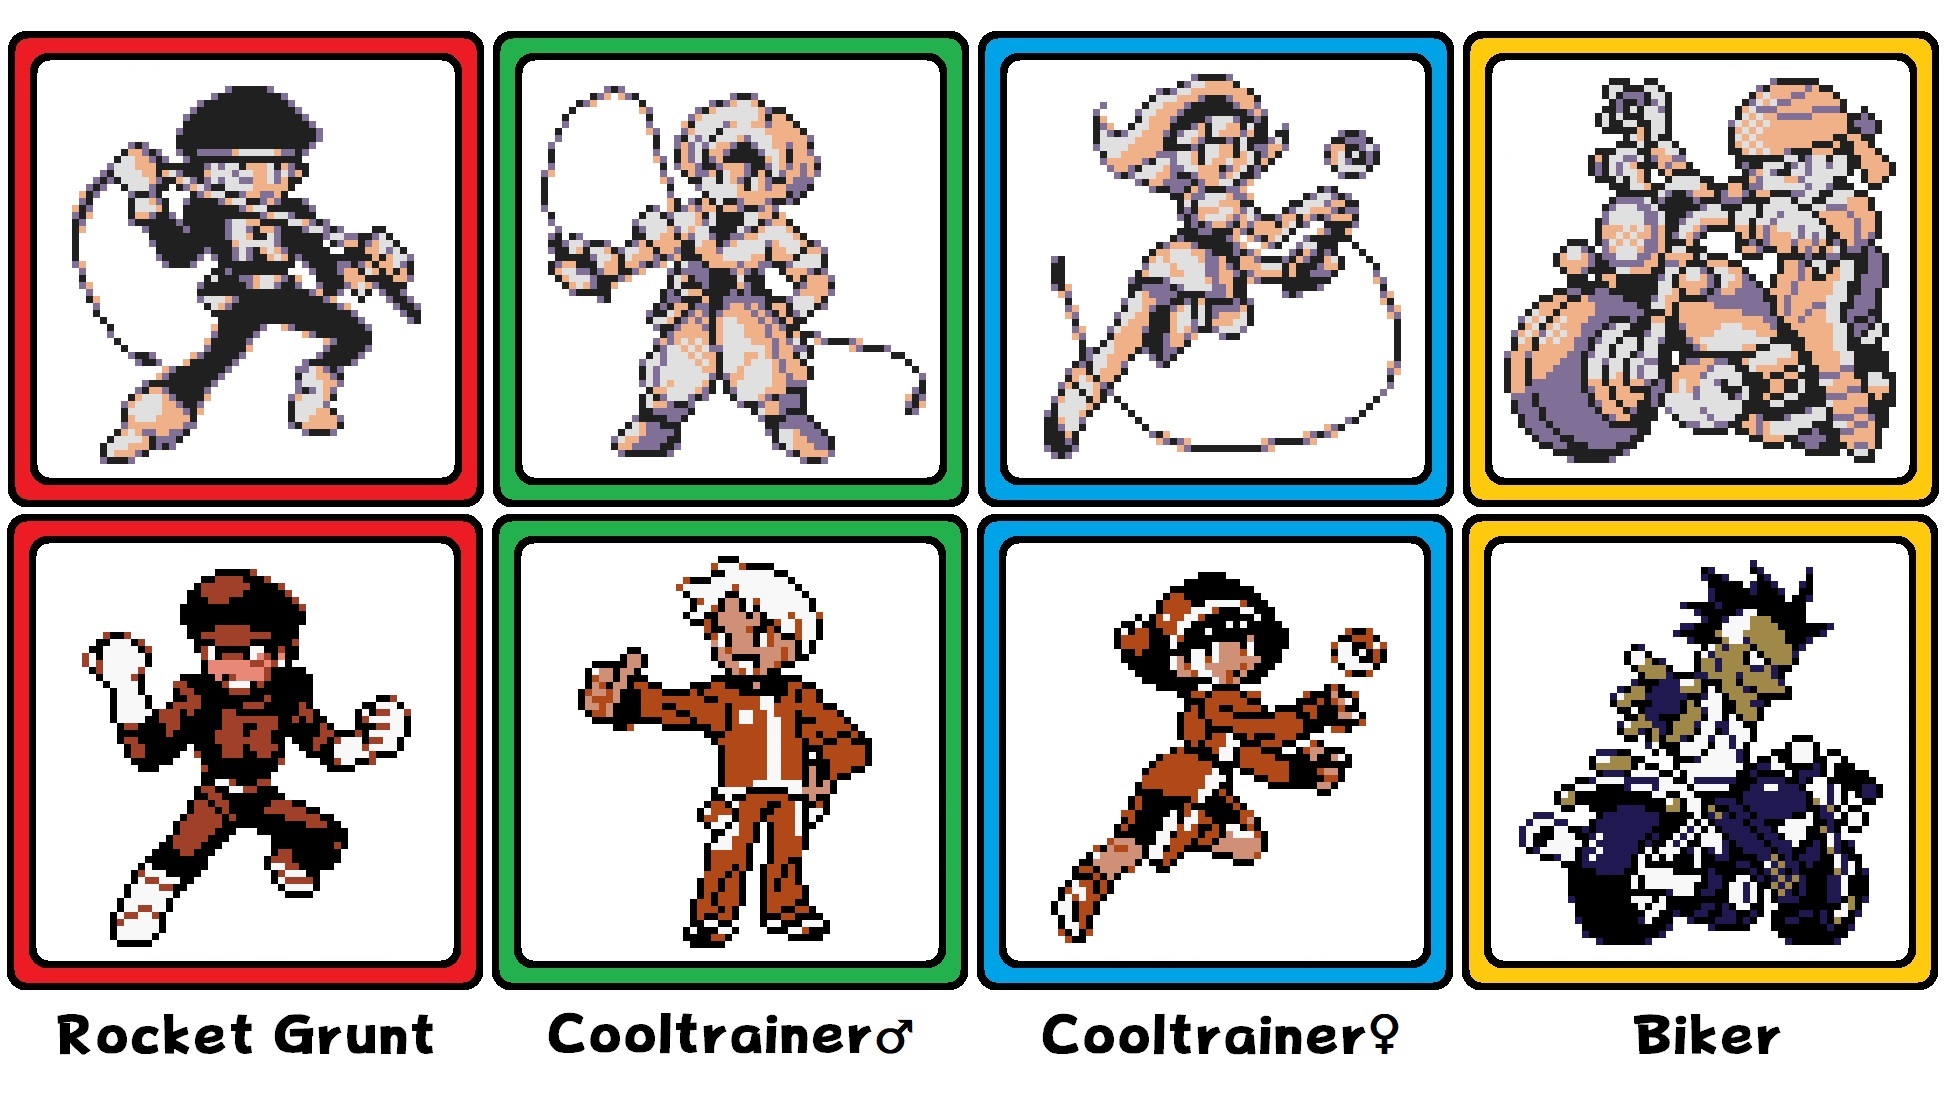 Dr Lava S Lost Pokemon Auf Twitter Beta Pokemon Trainers Gold Silver S 1997 Demo Included Some Early Unused Trainer Sprites Some Of These Trainers Originally Had Whips But Later Had Them Taken